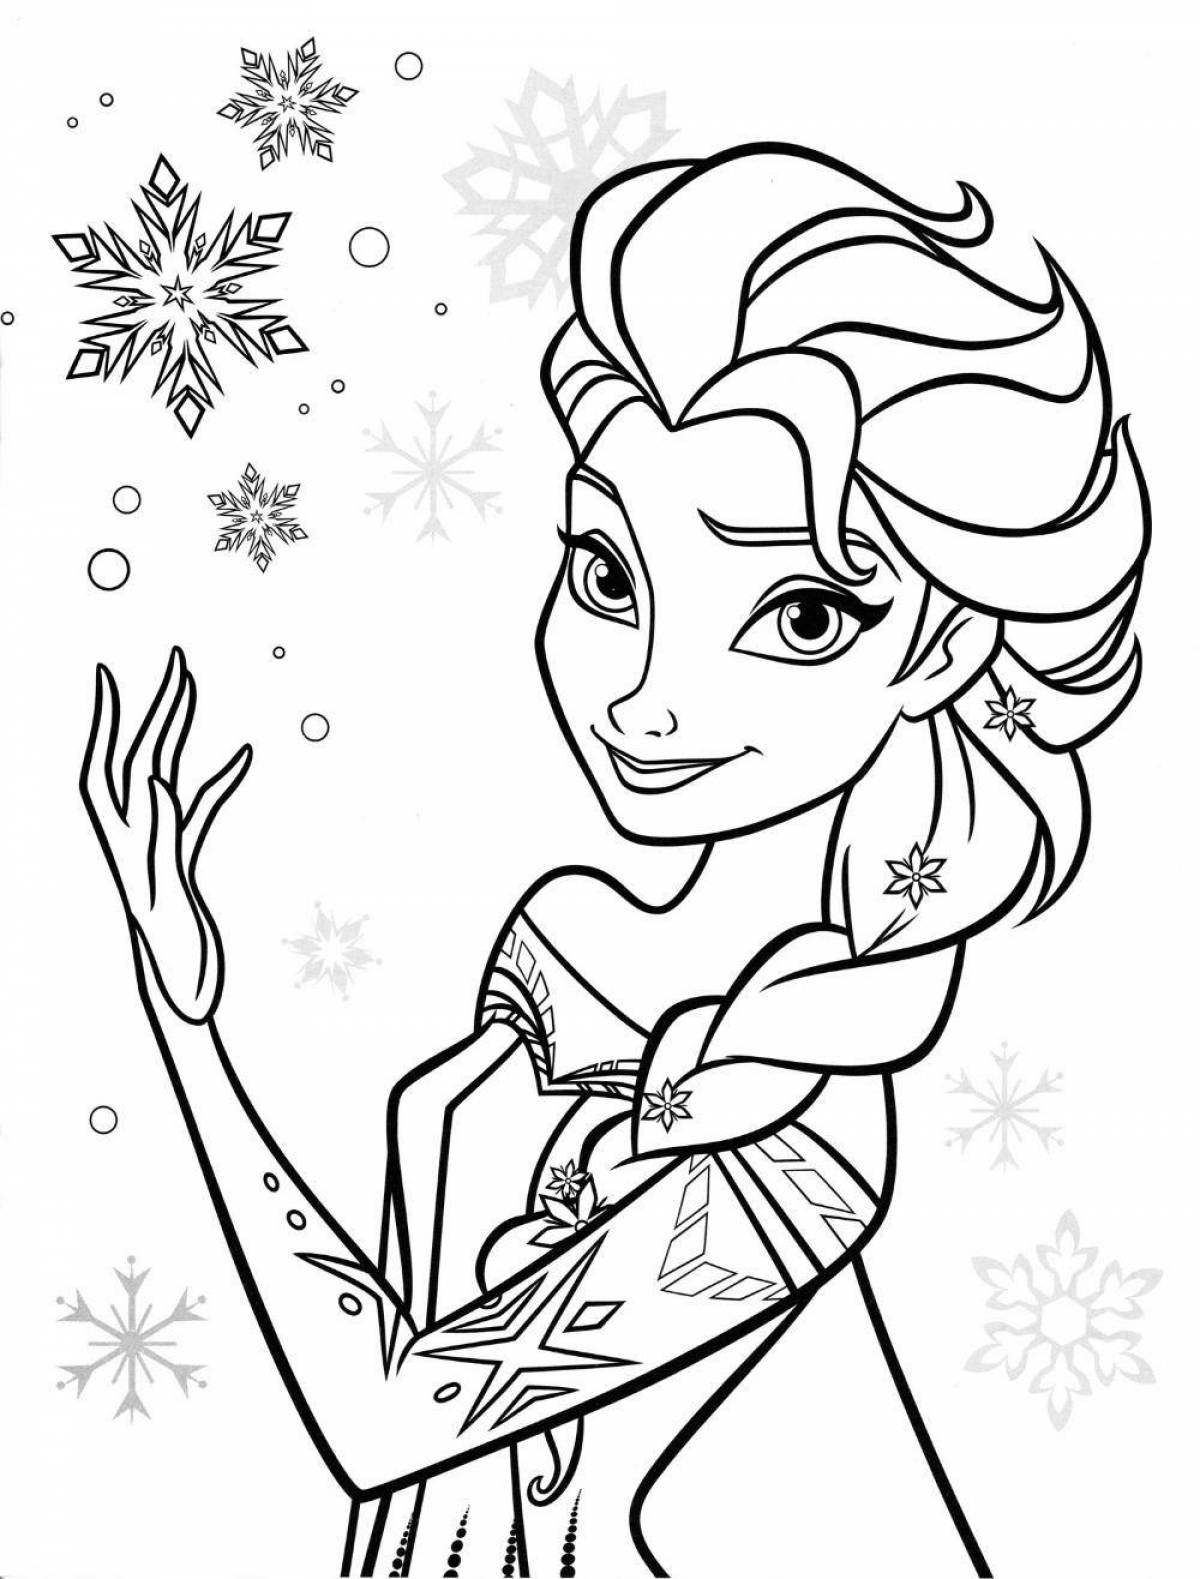 Elsa and anna glamor coloring